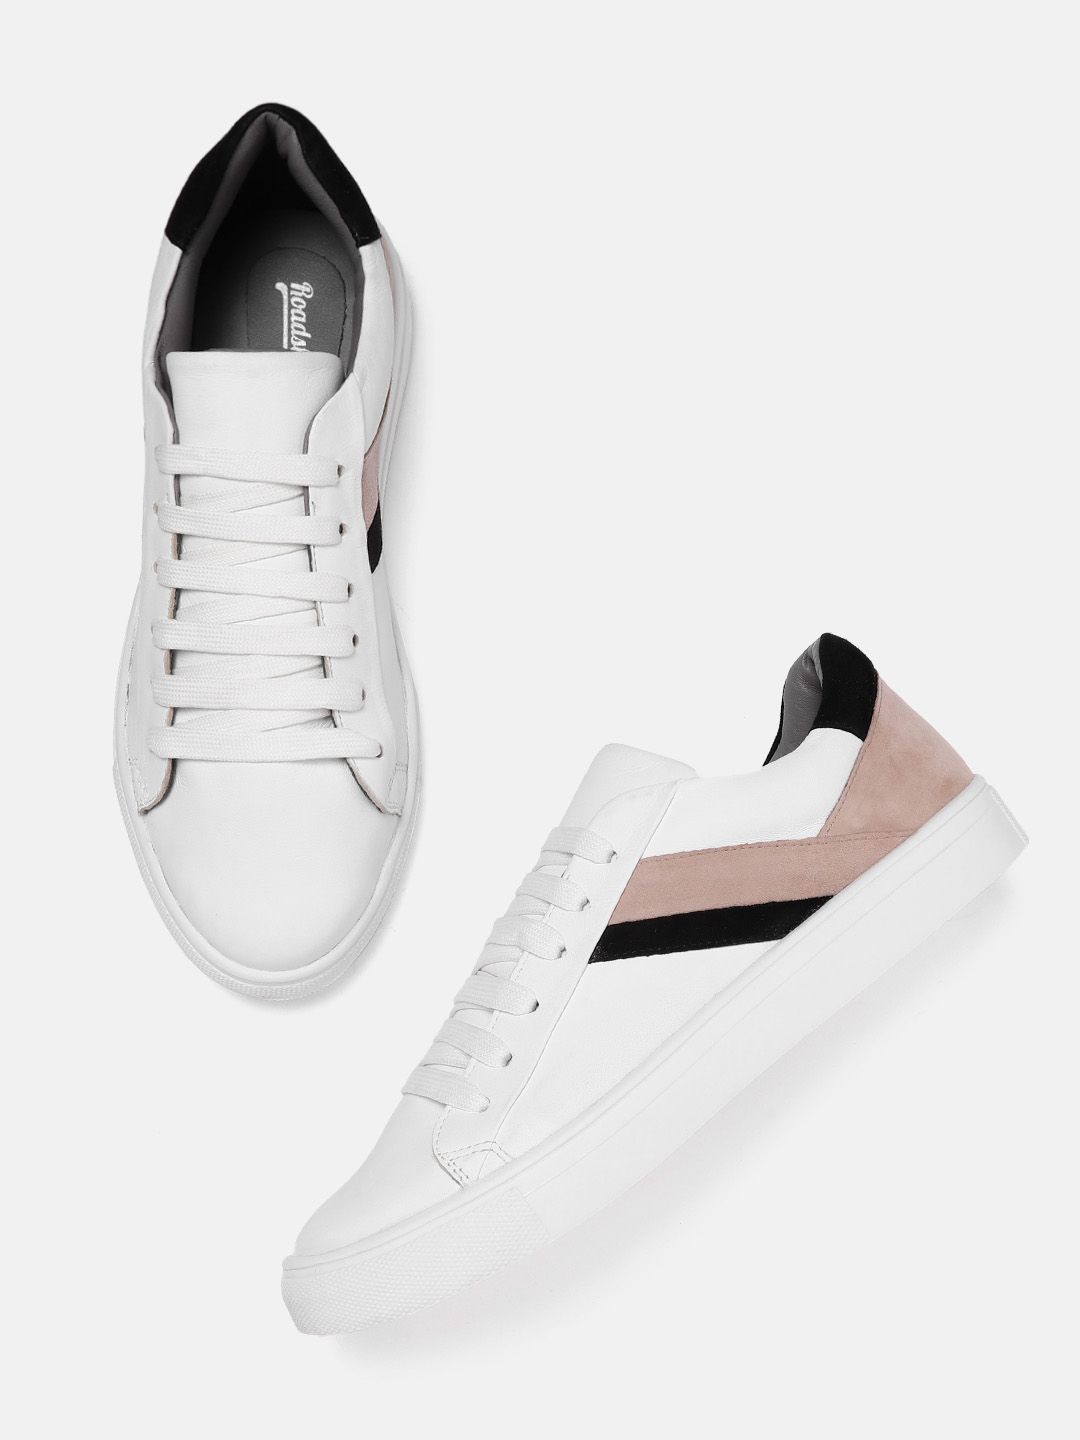 Roadster Women White & Tan Brown Striped Leather Sneakers Price in India